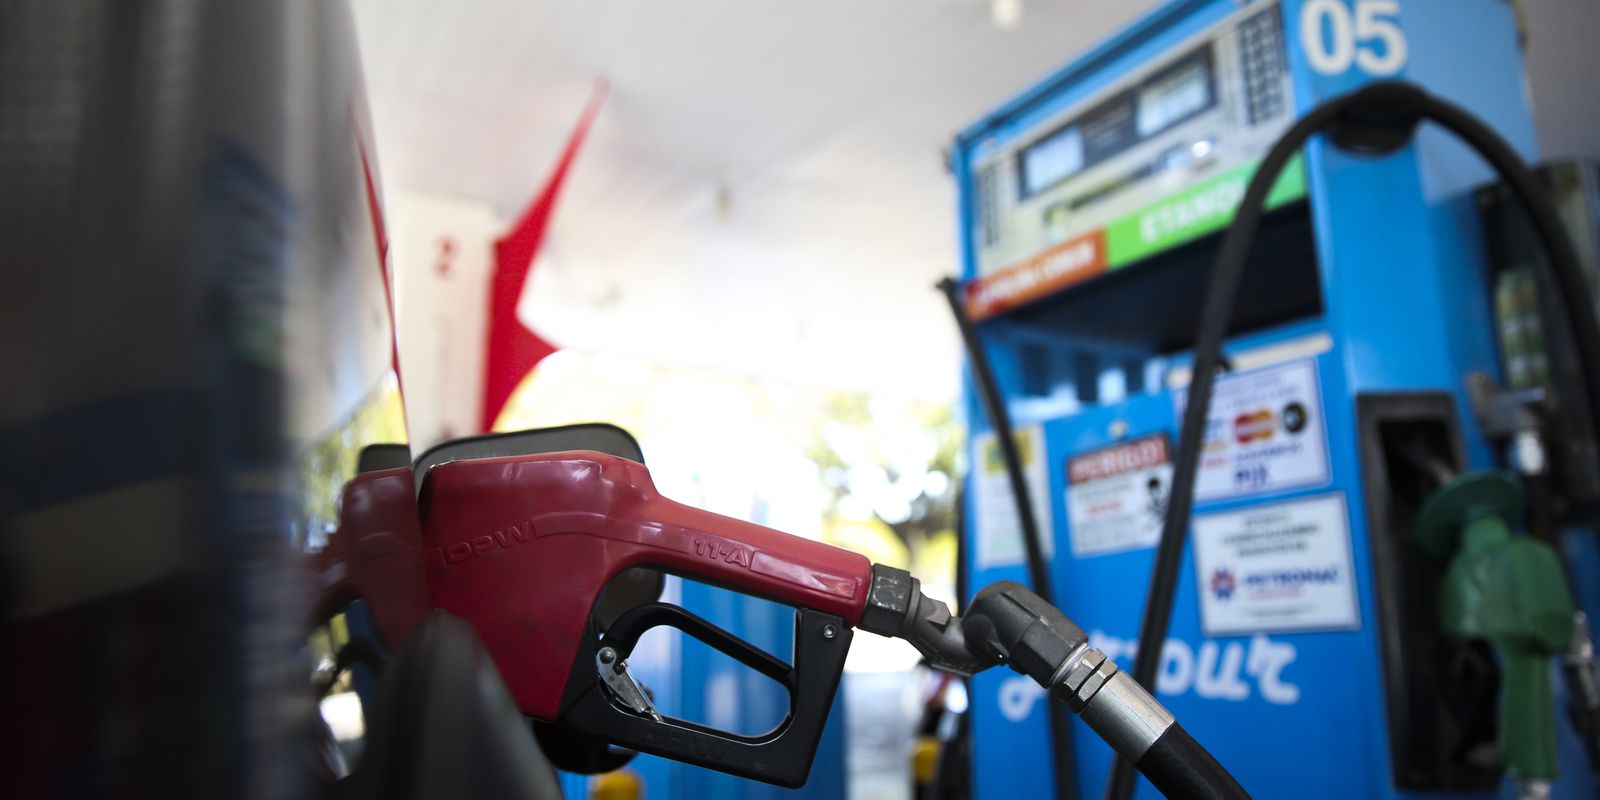 Ceará and Bahia lead complaints about fuel prices